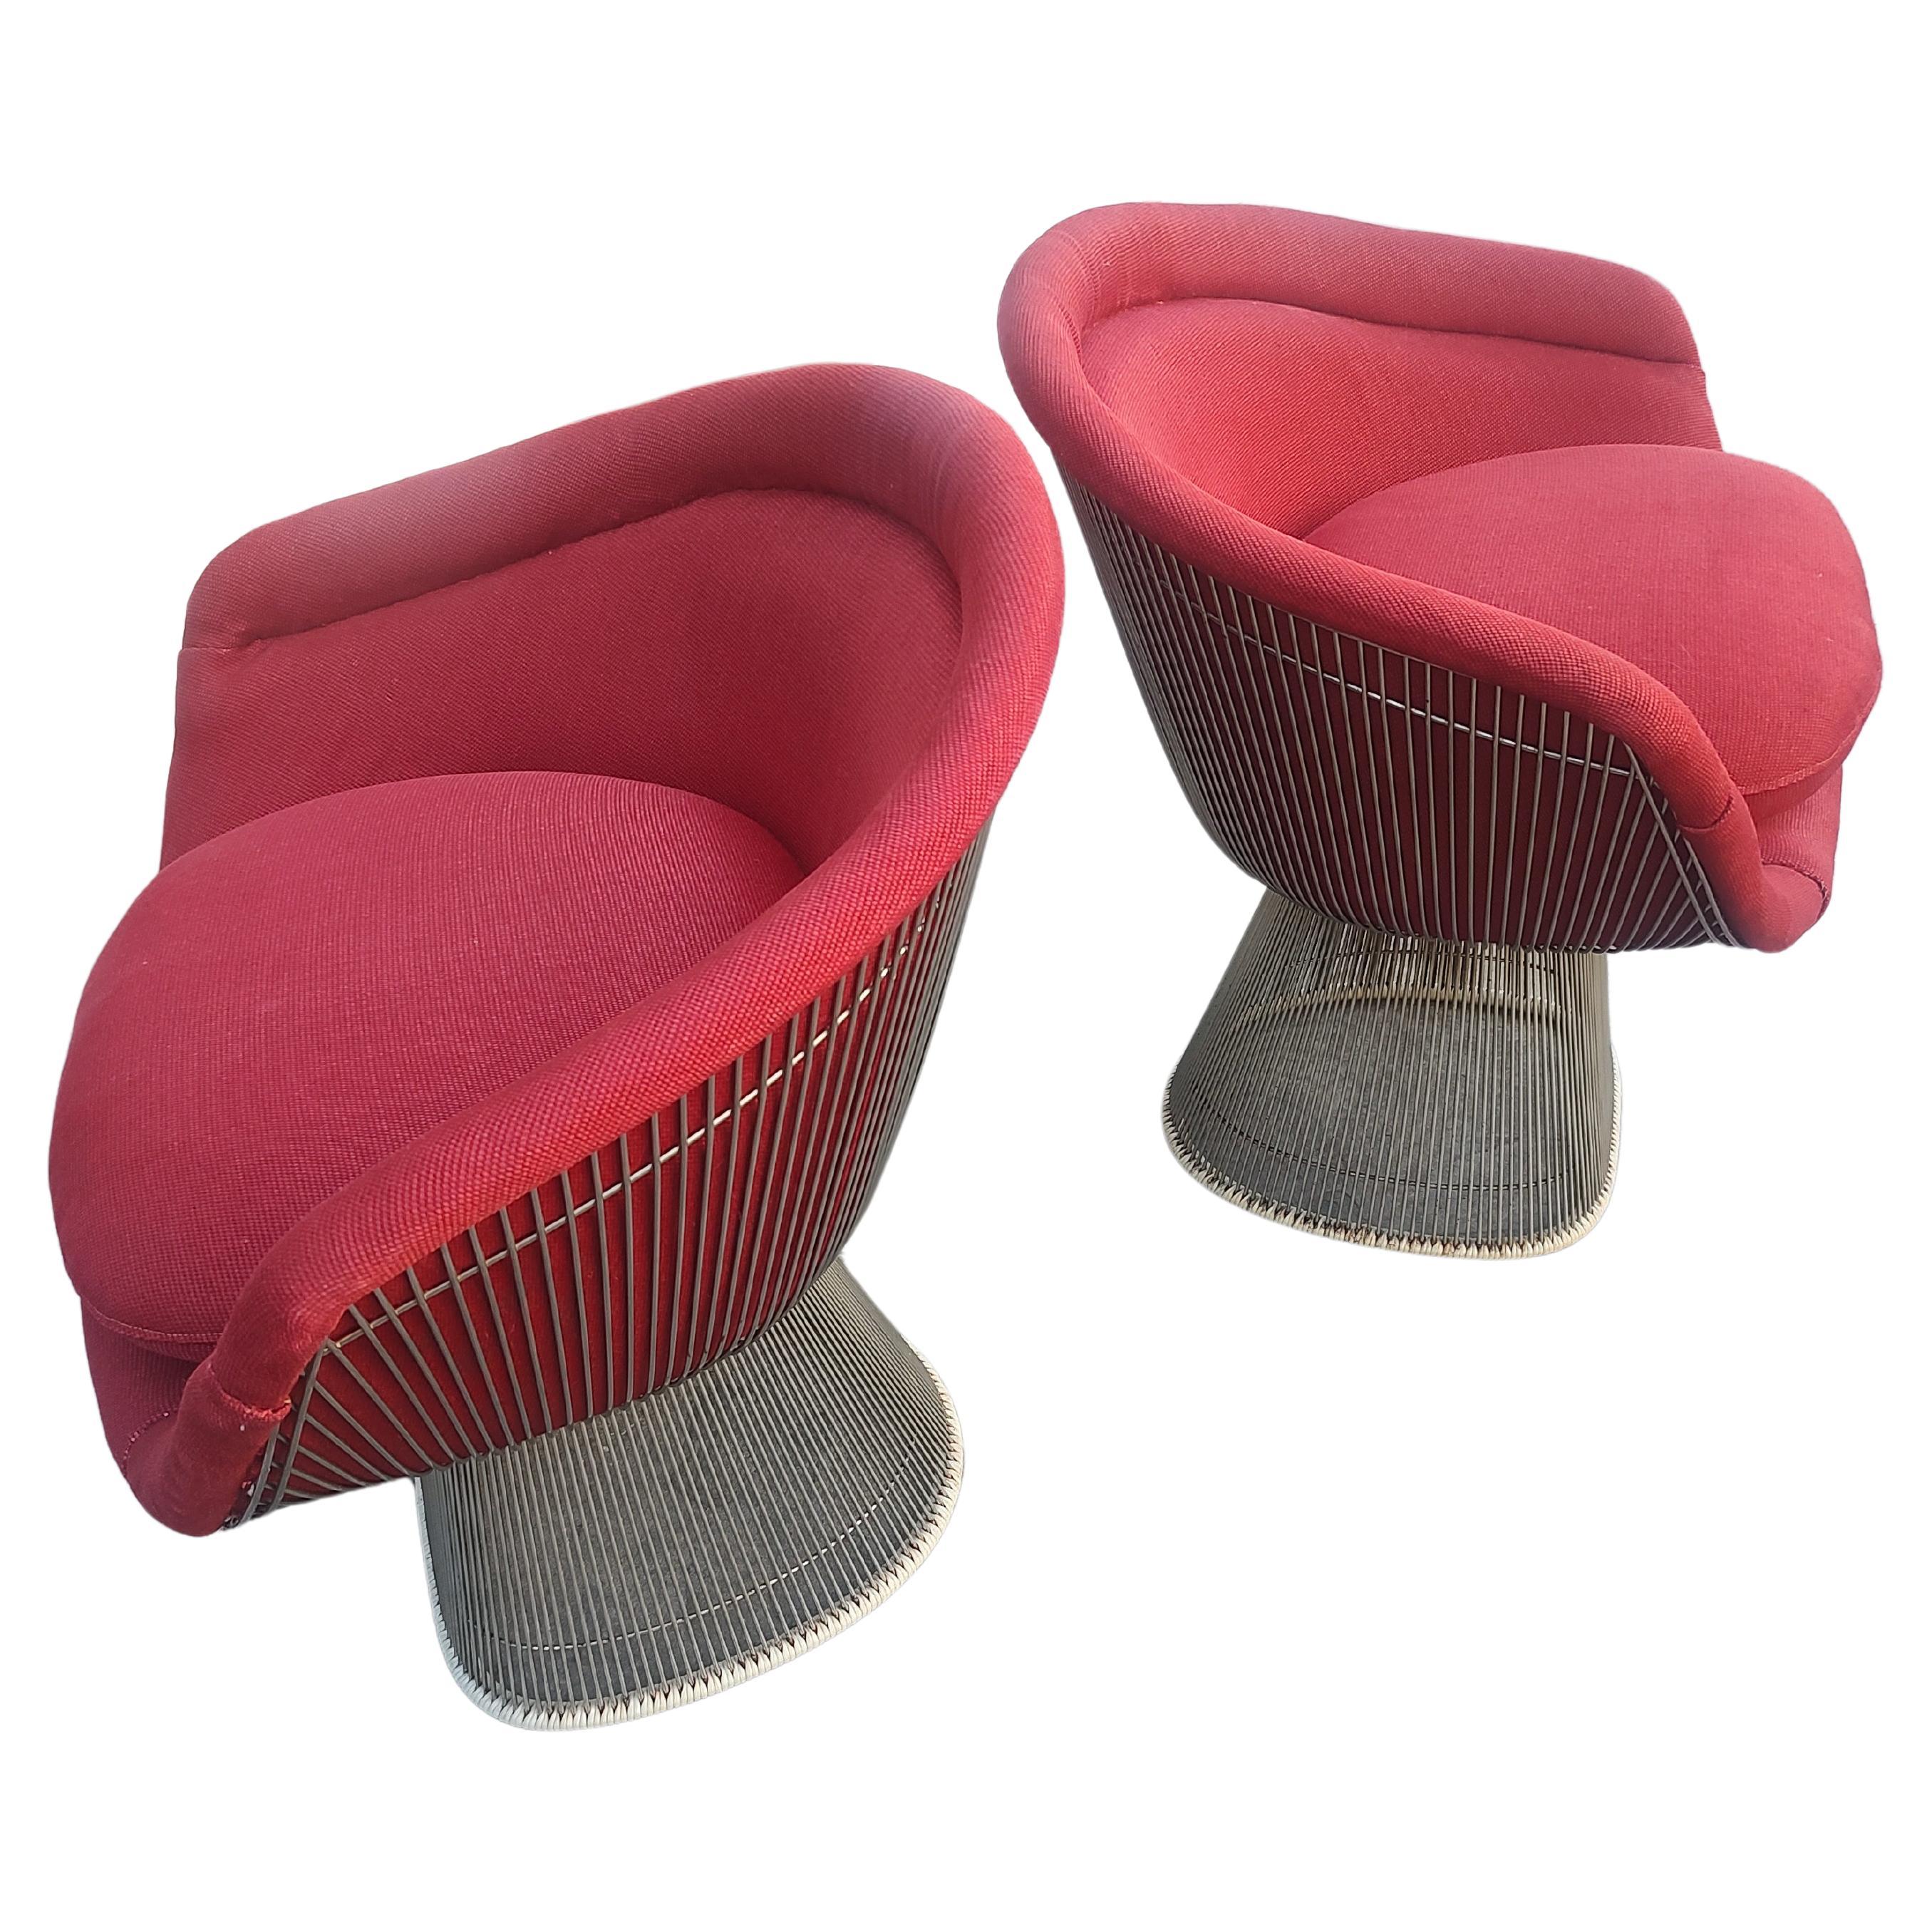 Mid-20th Century Pair of Warren Platner Mid Century Modern Lounge Chairs for Knoll C1965 For Sale